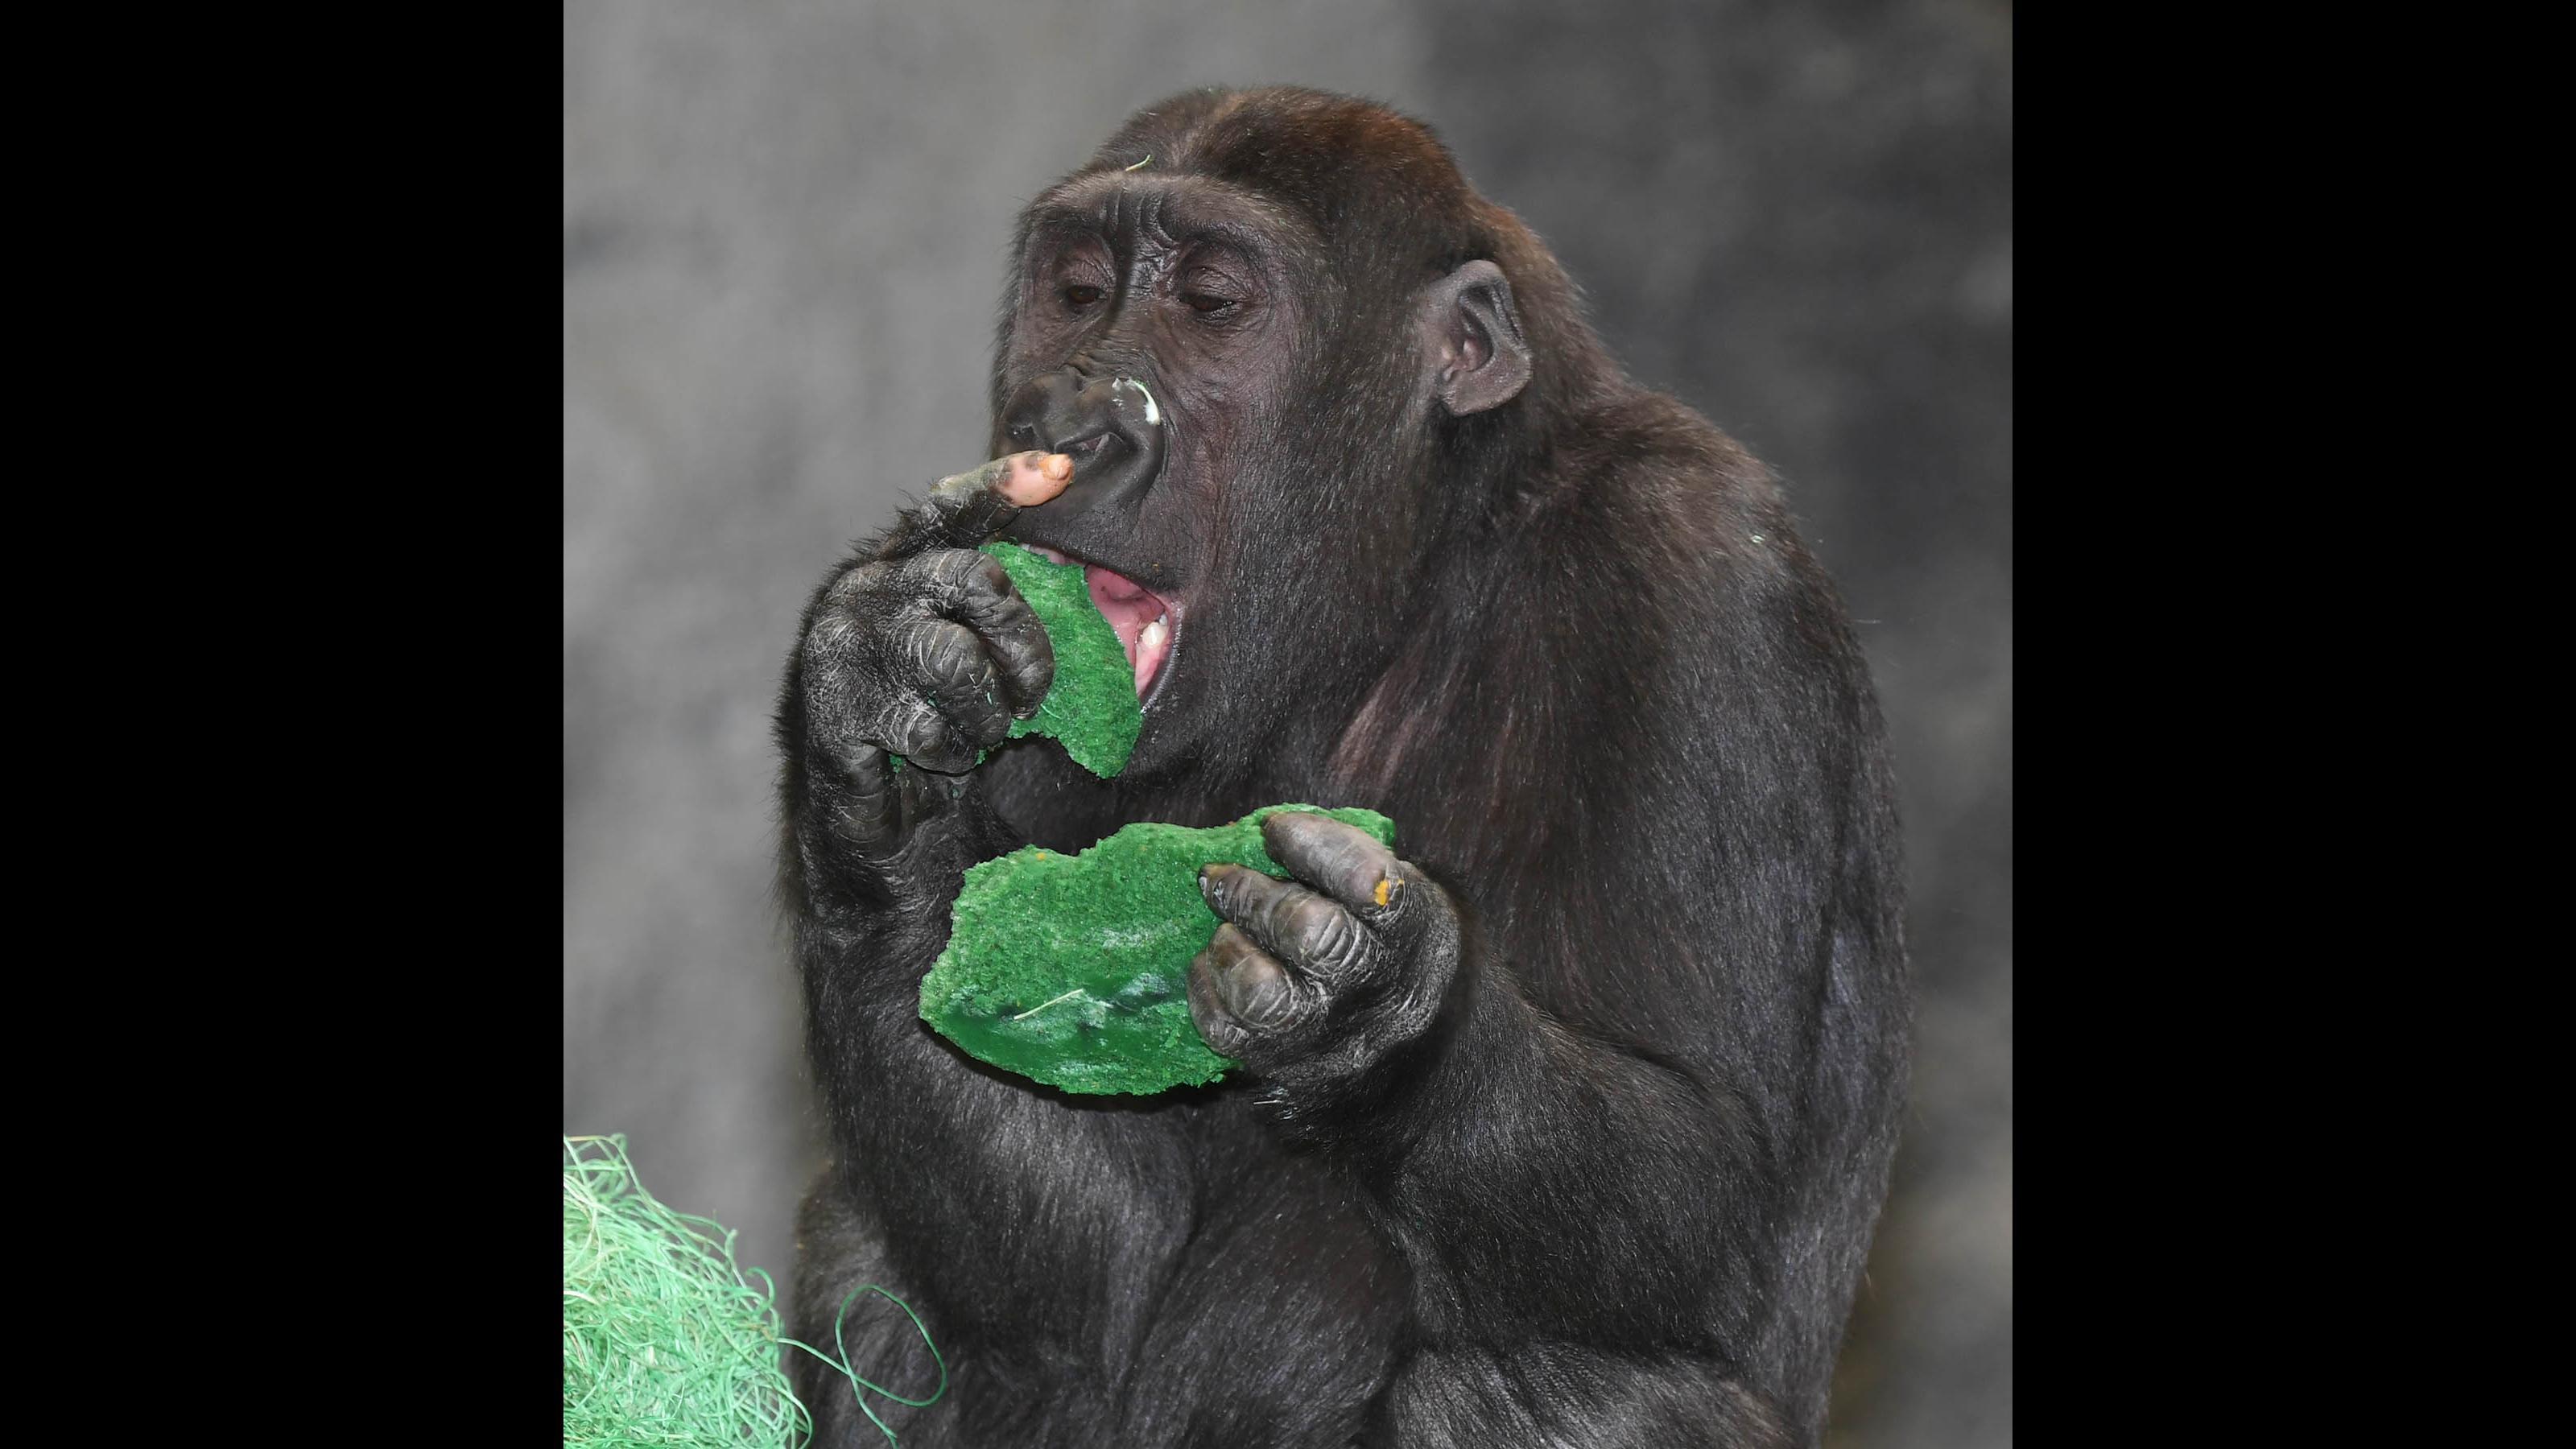 Nora, a 4-year-old western lowland gorilla at Brookfield Zoo, received green biscuit treats last Friday in celebration of St. Patrick's Day. (Jim Schulz / Chicago Zoological Society)